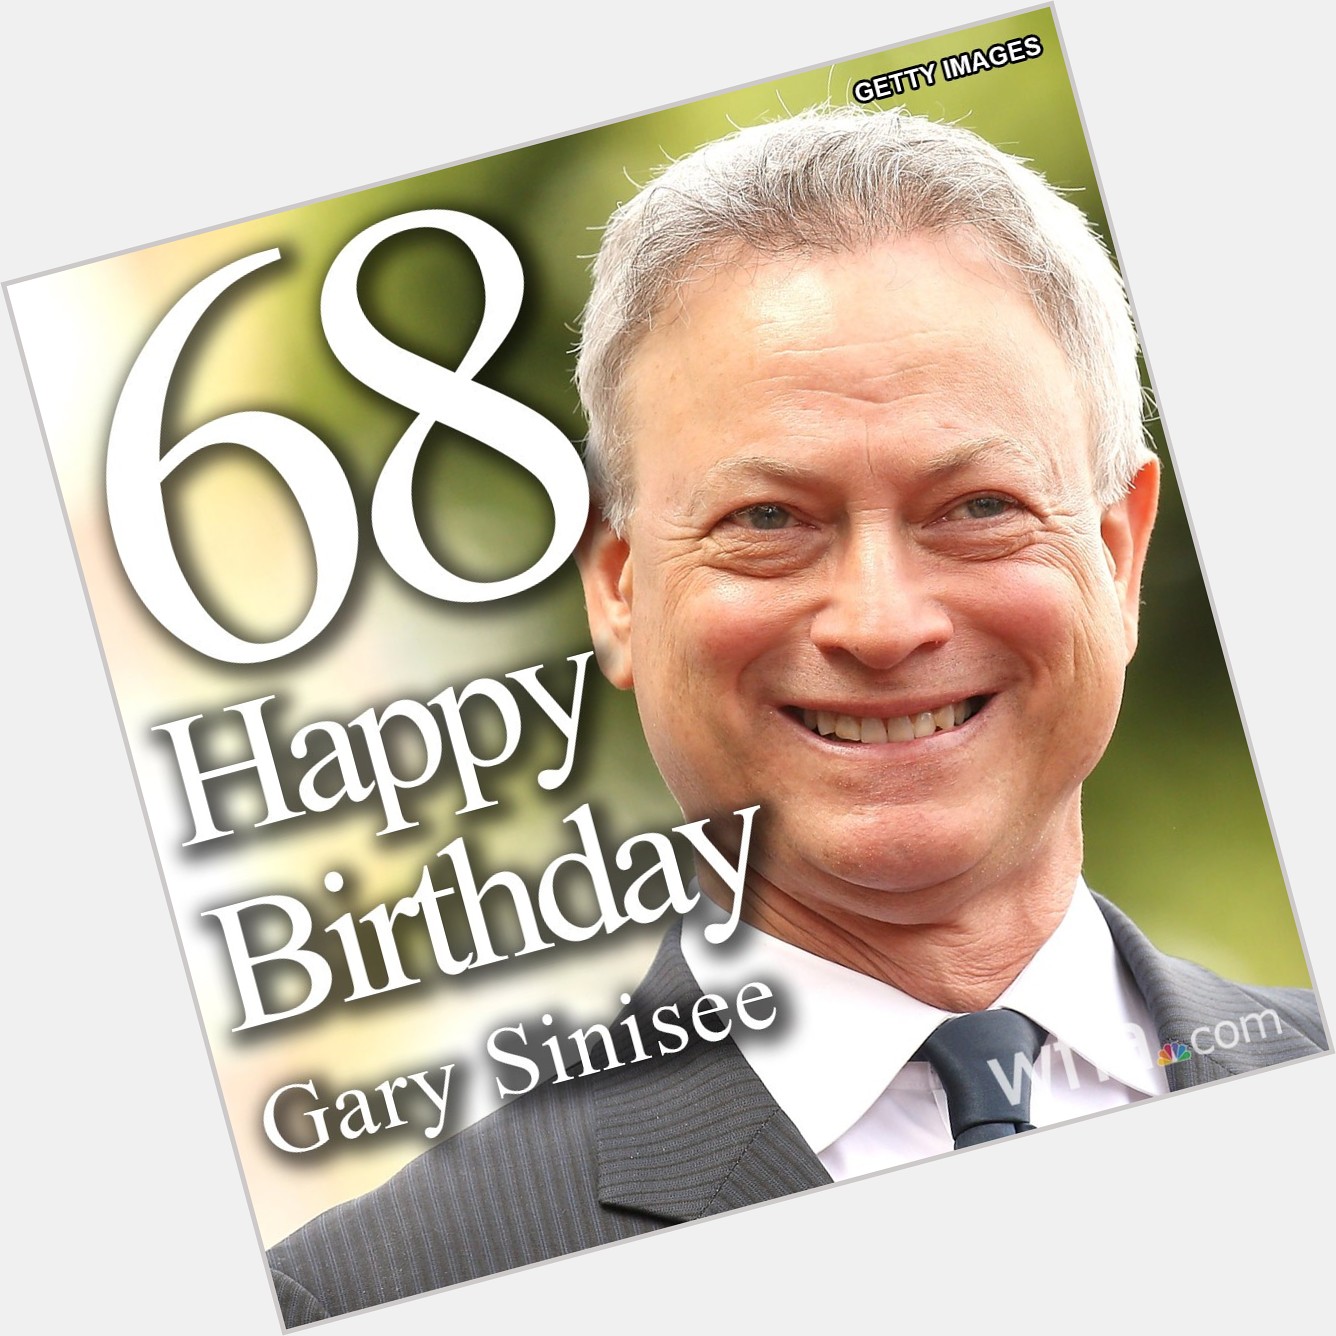 HAPPY BIRTHDAY, GARY SINISE The \"Forrest Gump\" and \"Of Mice and Men\" star turns 68 today!  